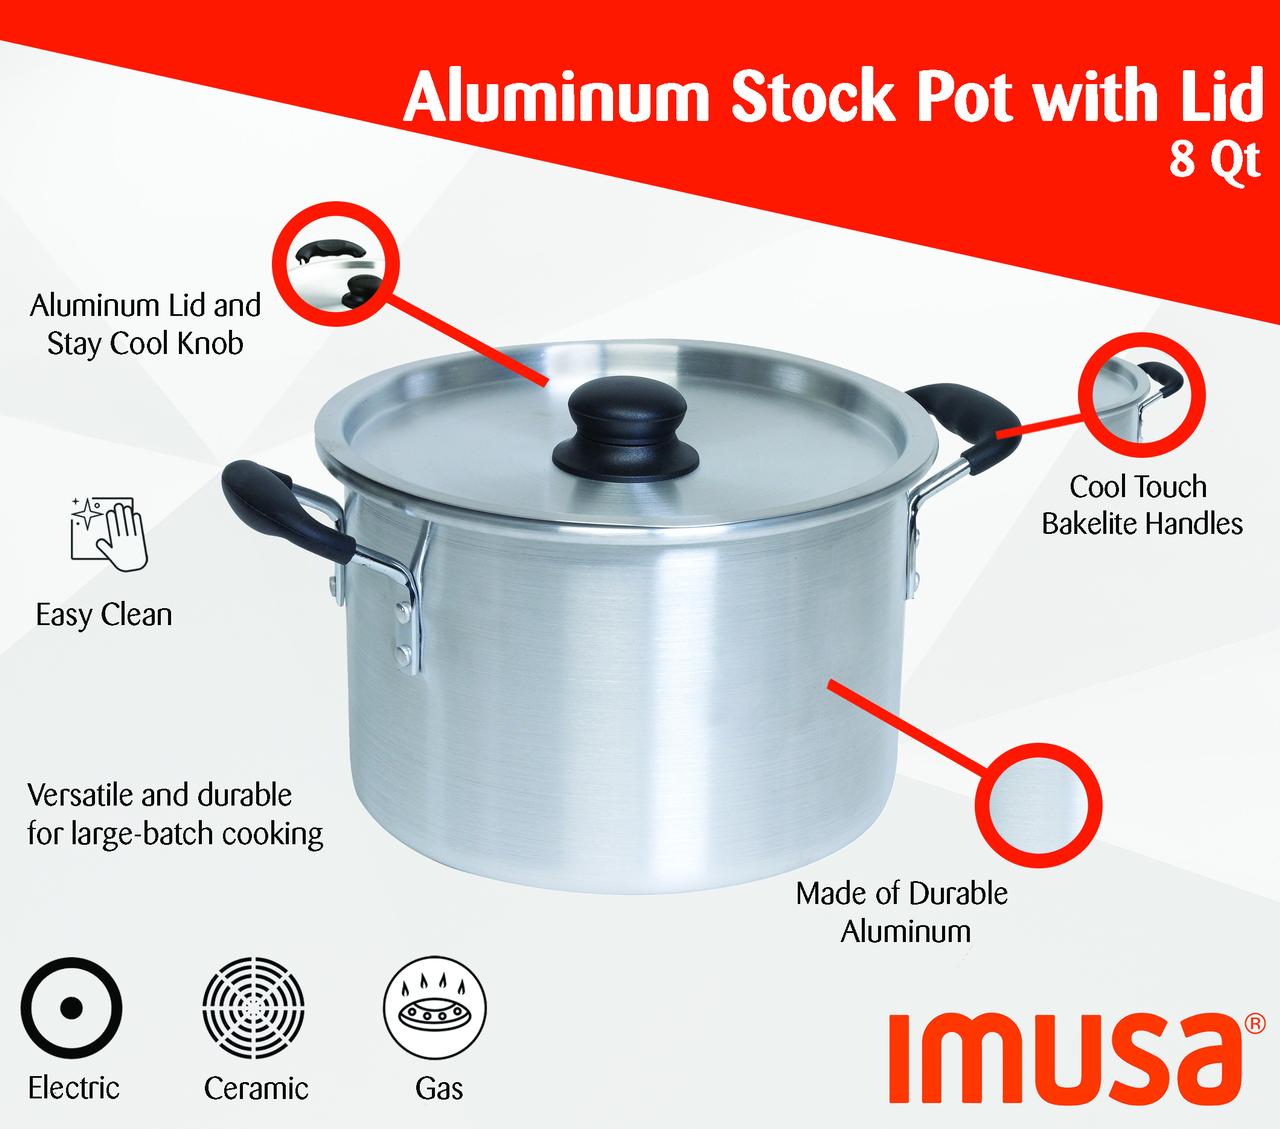 Imusa 8Qt Aluminum Stock Pot with Lid - image 5 of 13